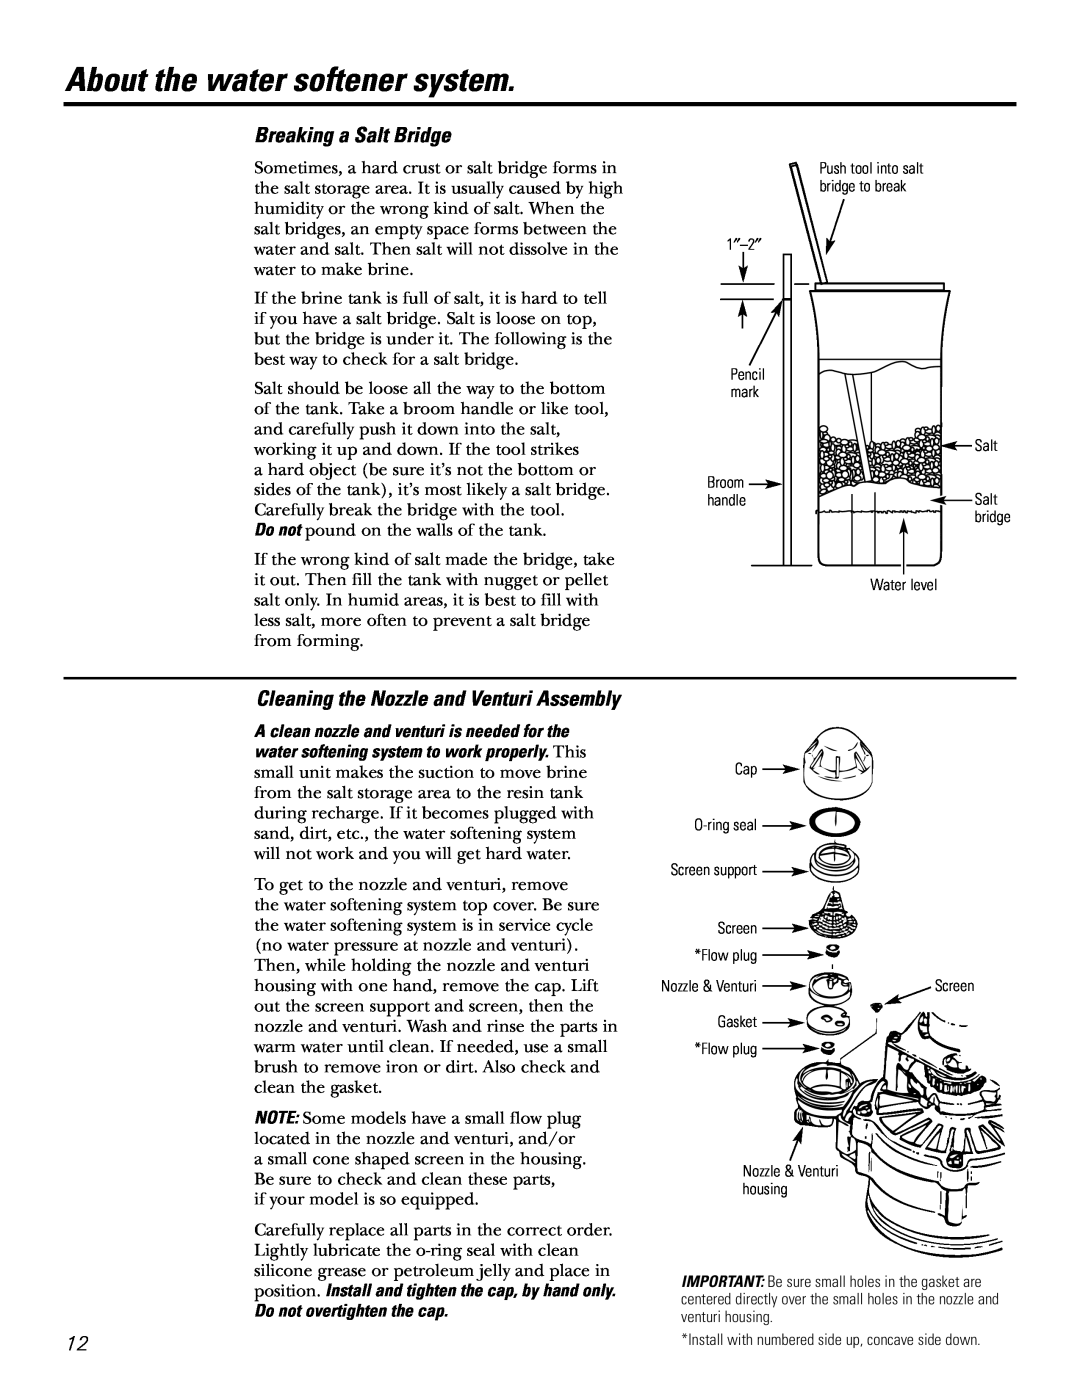 GE GXSF27E manual About the water softener system, Breaking a Salt Bridge, Cleaning the Nozzle and Venturi Assembly 